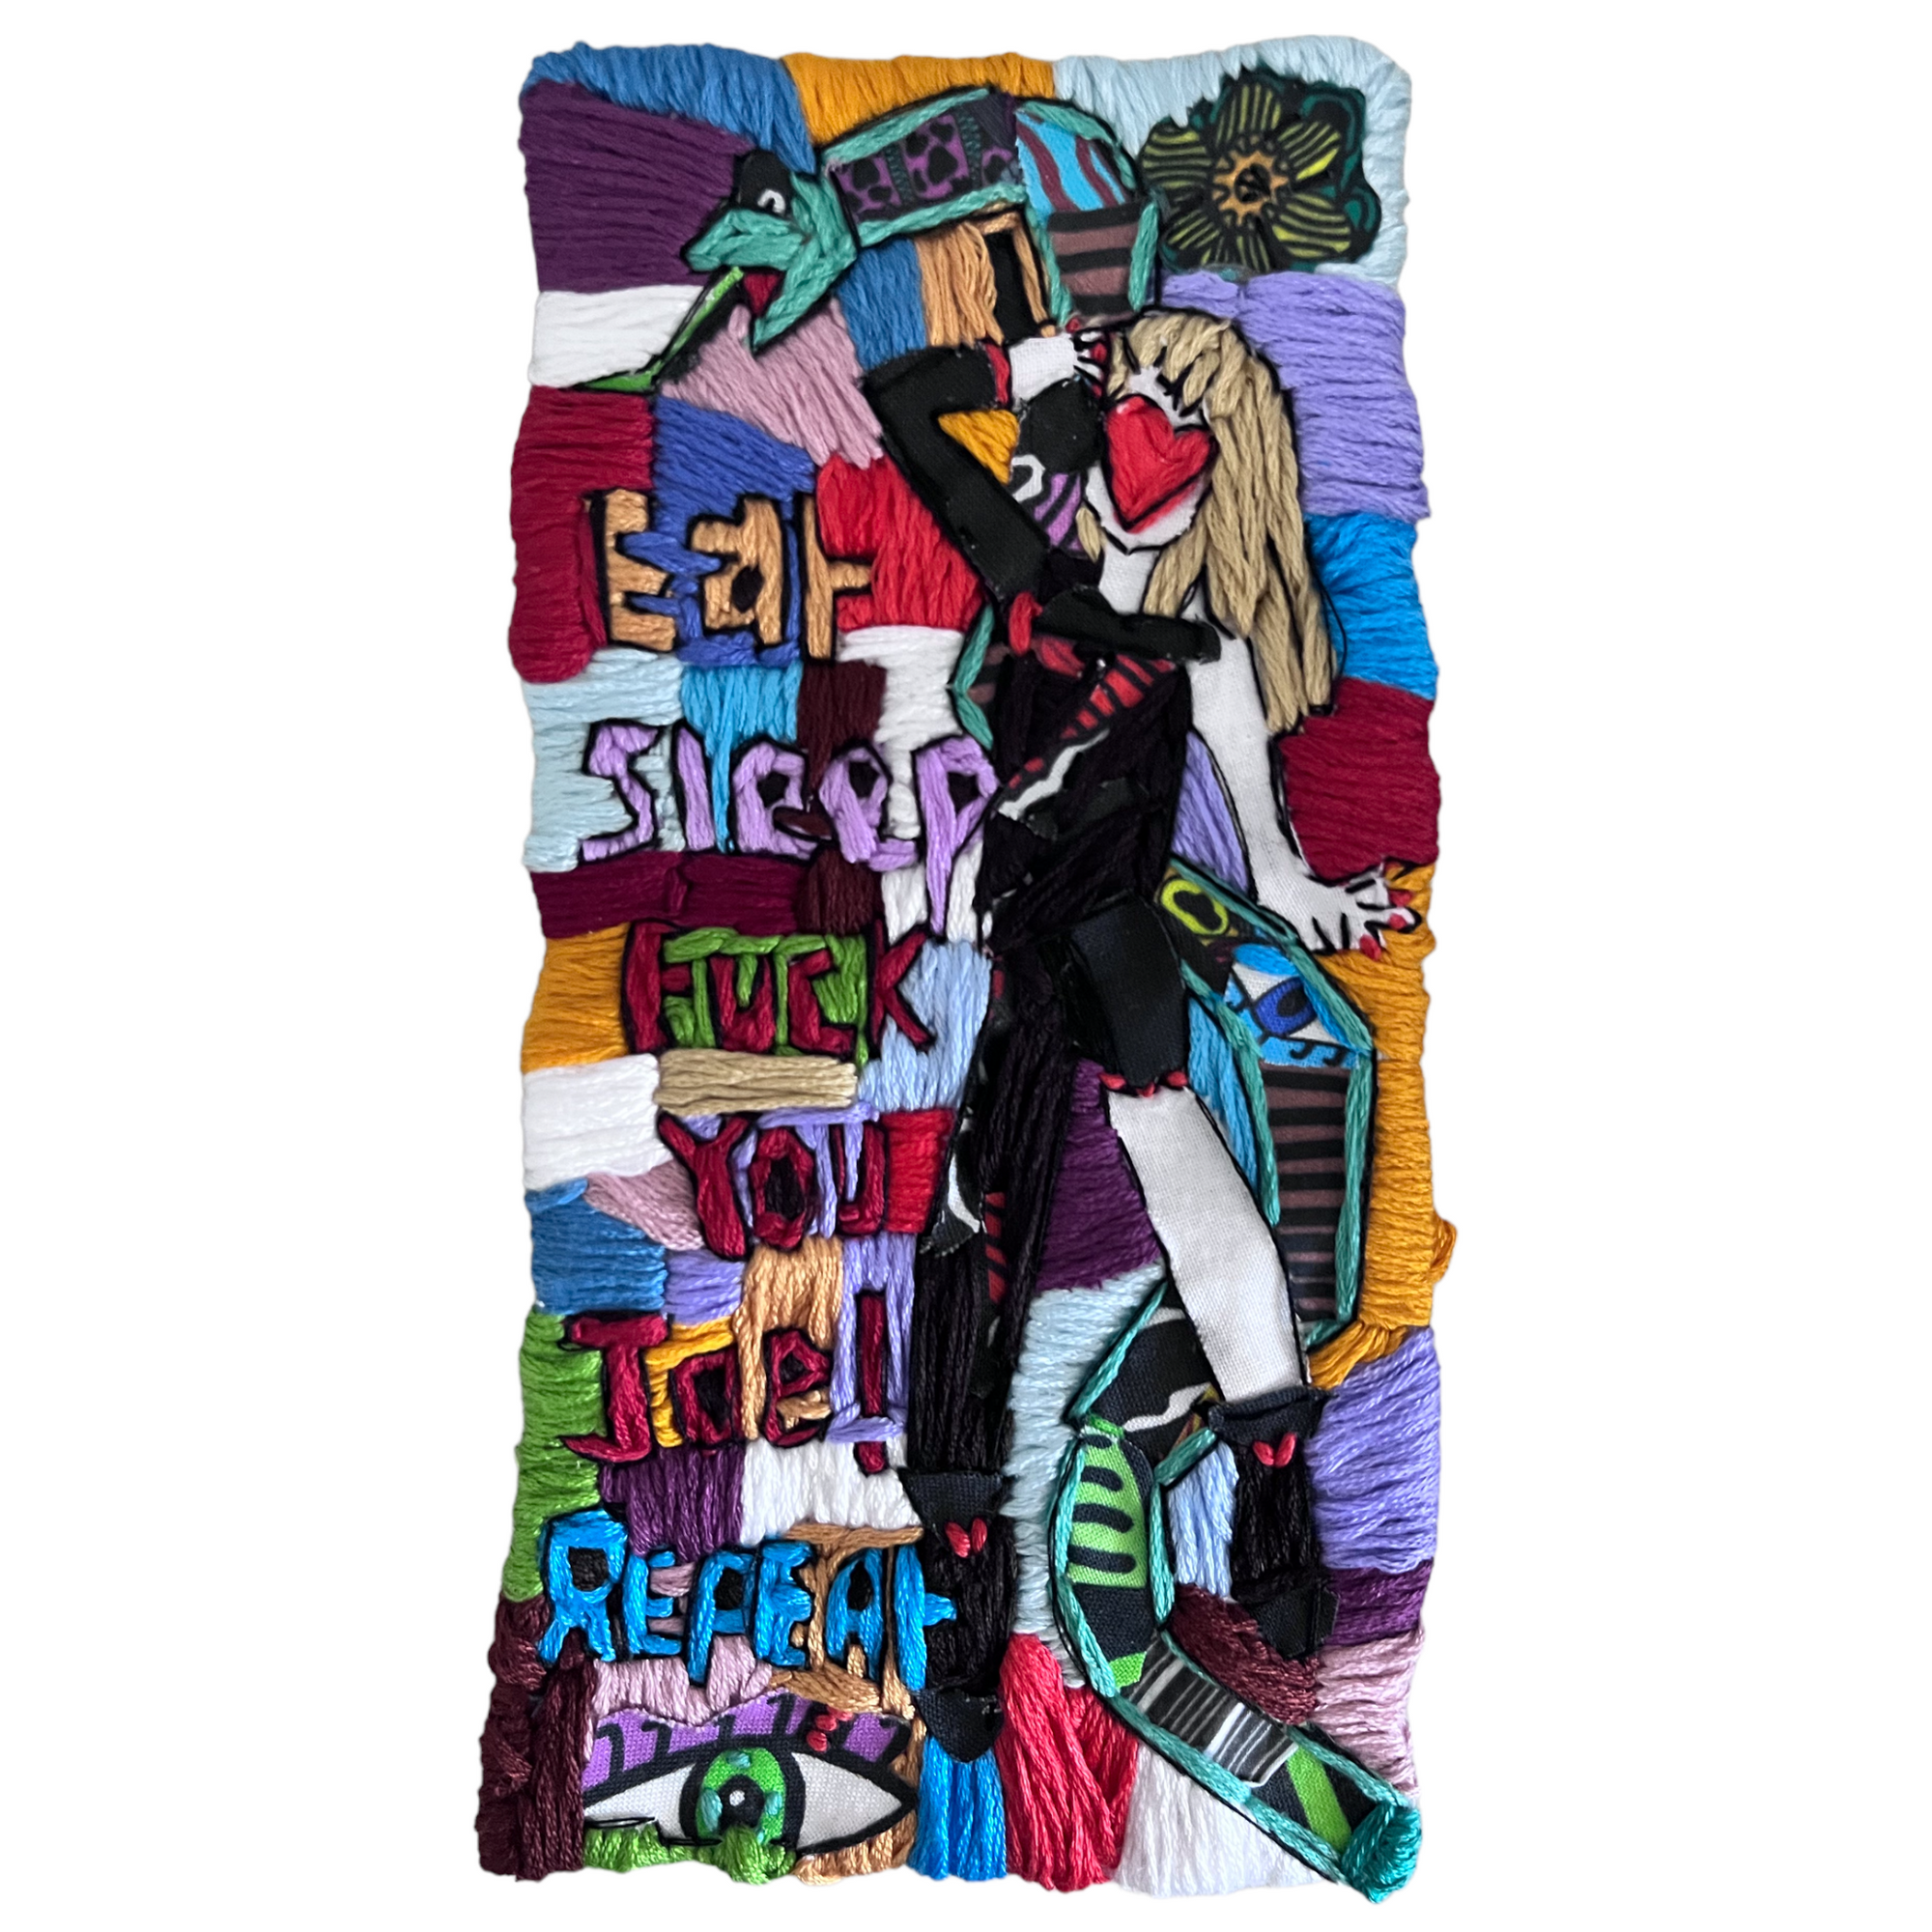 An embroidery and fabric artwork of Tayla Swift by Antayjo Art